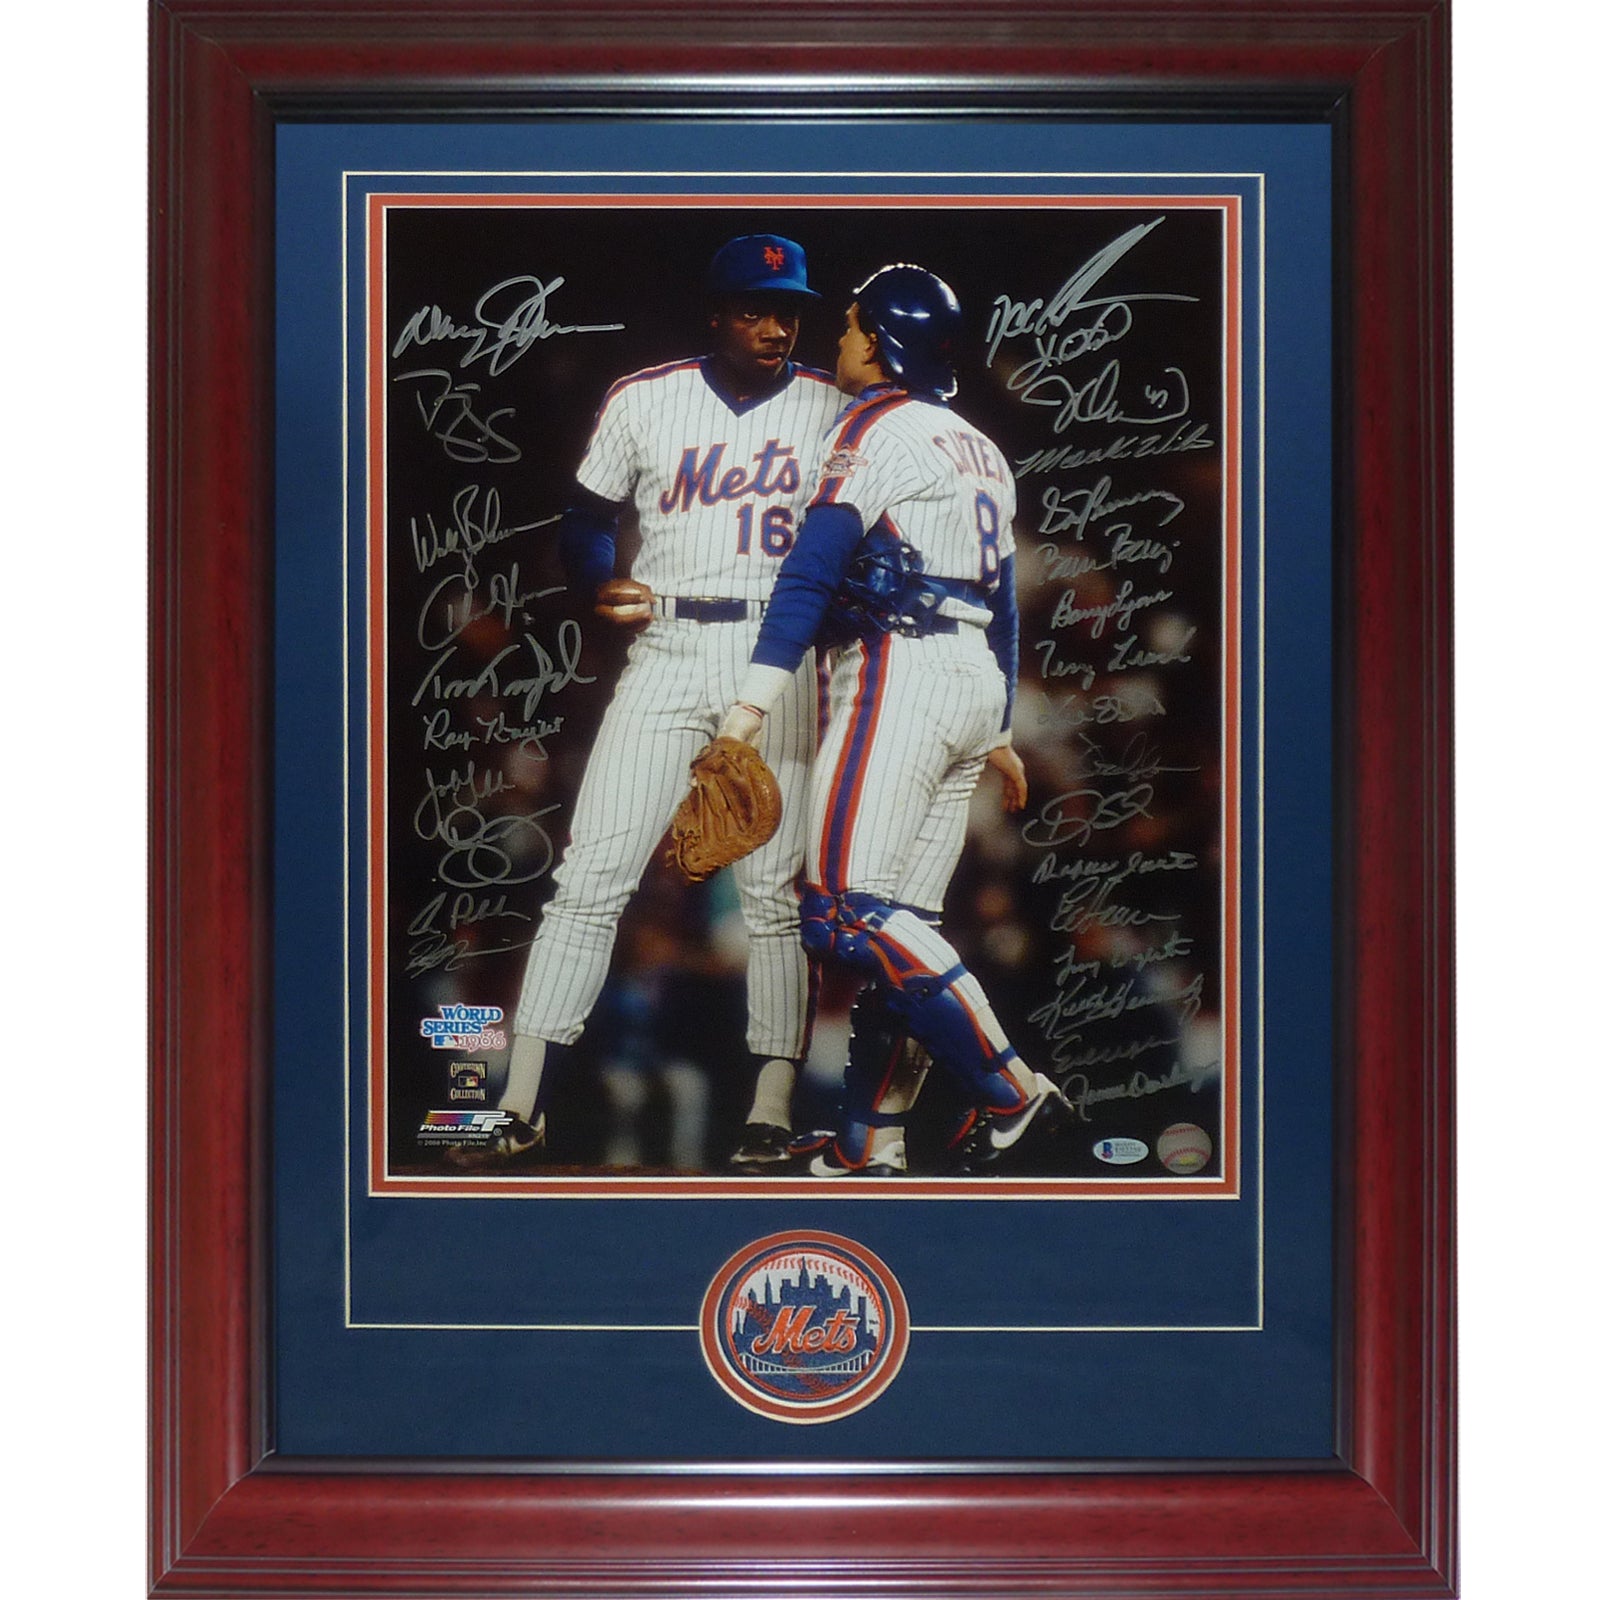 1986 New York Mets Team Autographed (World Series Champs – Gooden and –  Palm Beach Autographs LLC